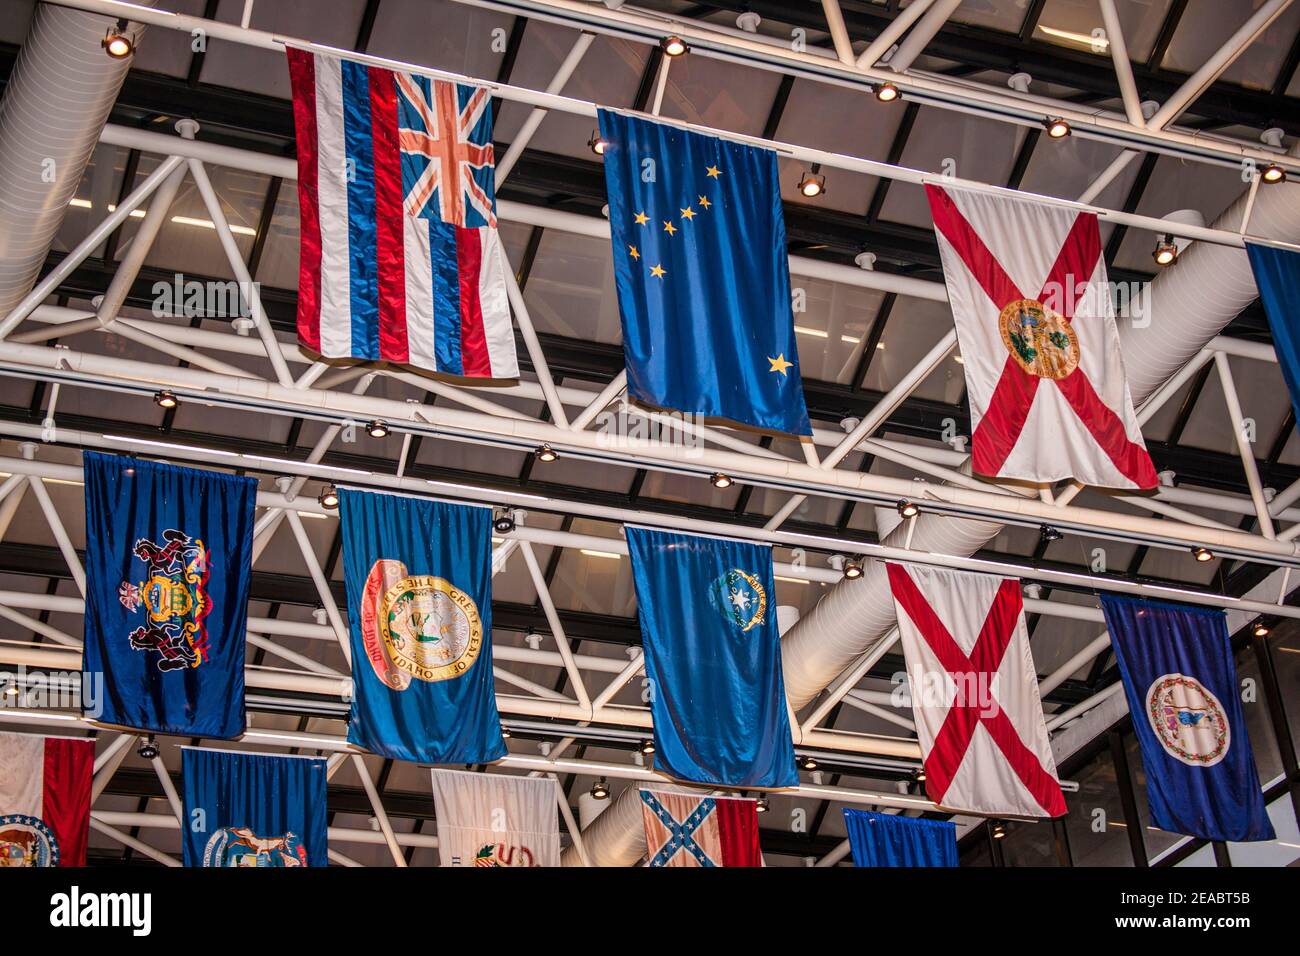 State flags hang above the lobby of Government Center Metrorail Station in downtown Miami, Florida. Stock Photo